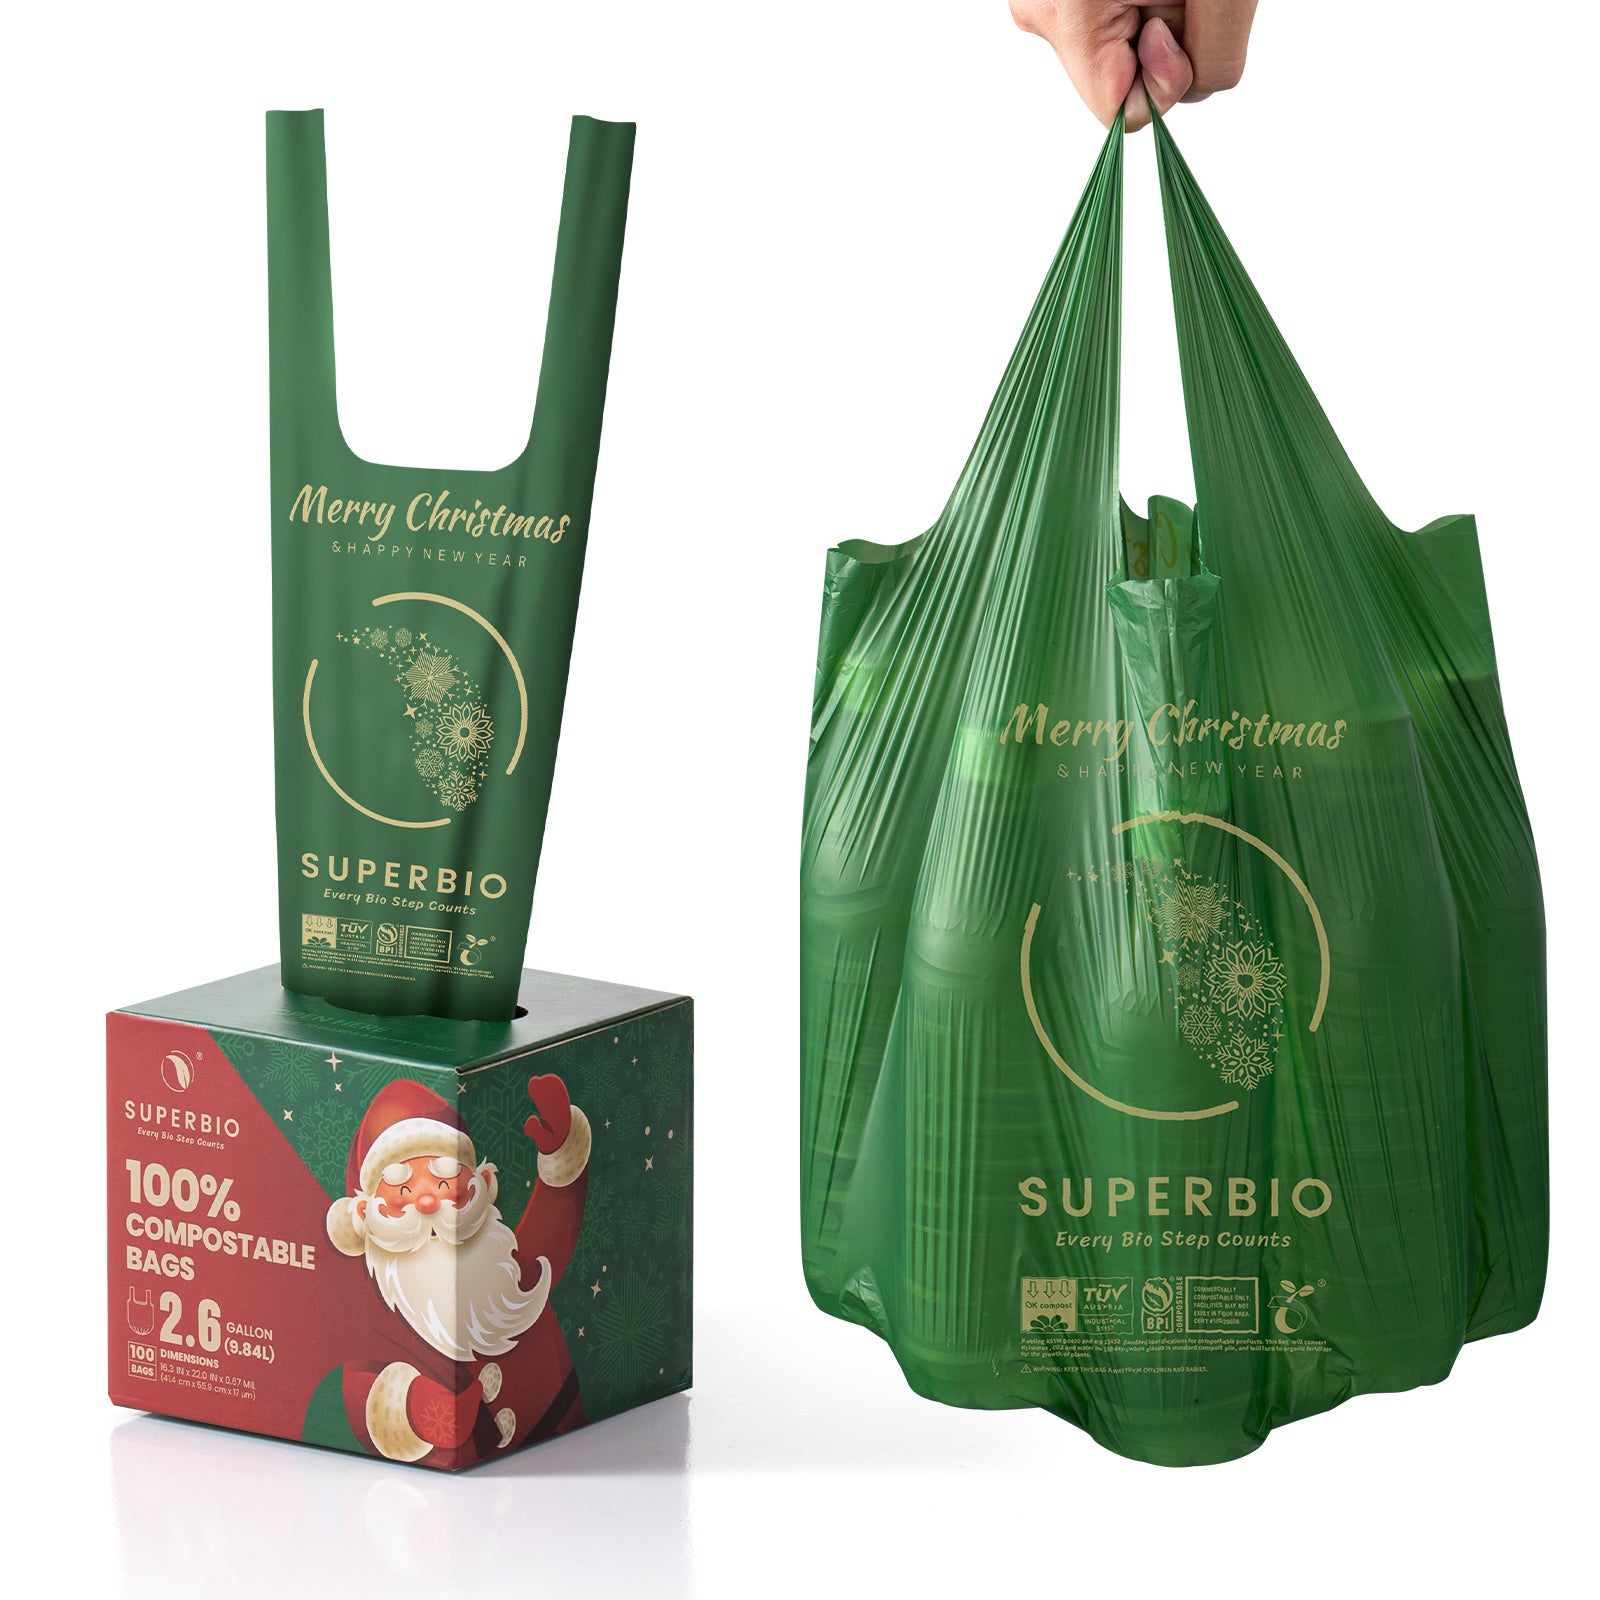 SUPERBIO 2.6 Gallon Compostable Handle Tie Trash Bags, 100 Count, 1 Pack, Christmas Gift package